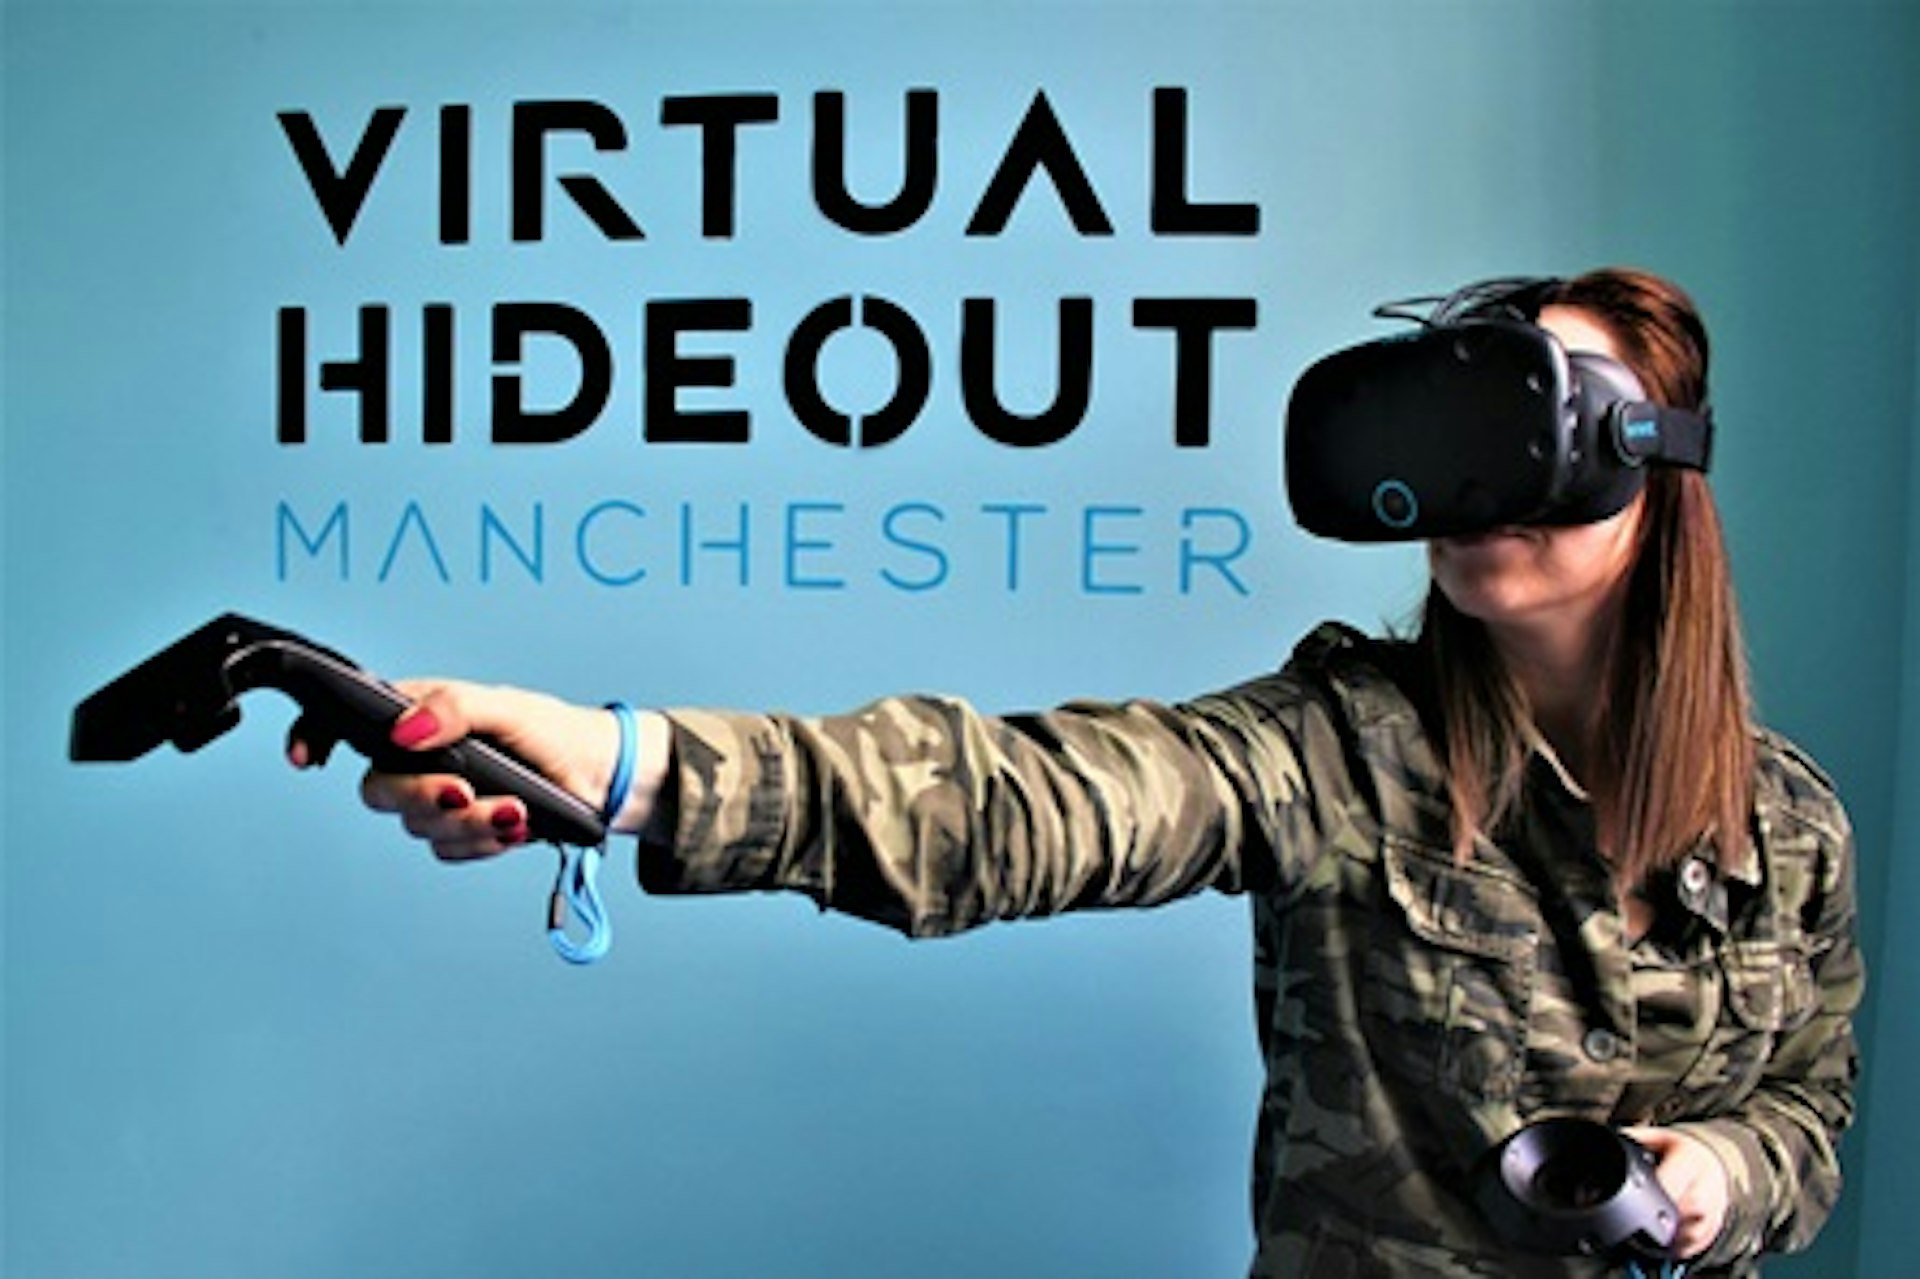 VR Experience for Two at Virtual Hideout Manchester 2